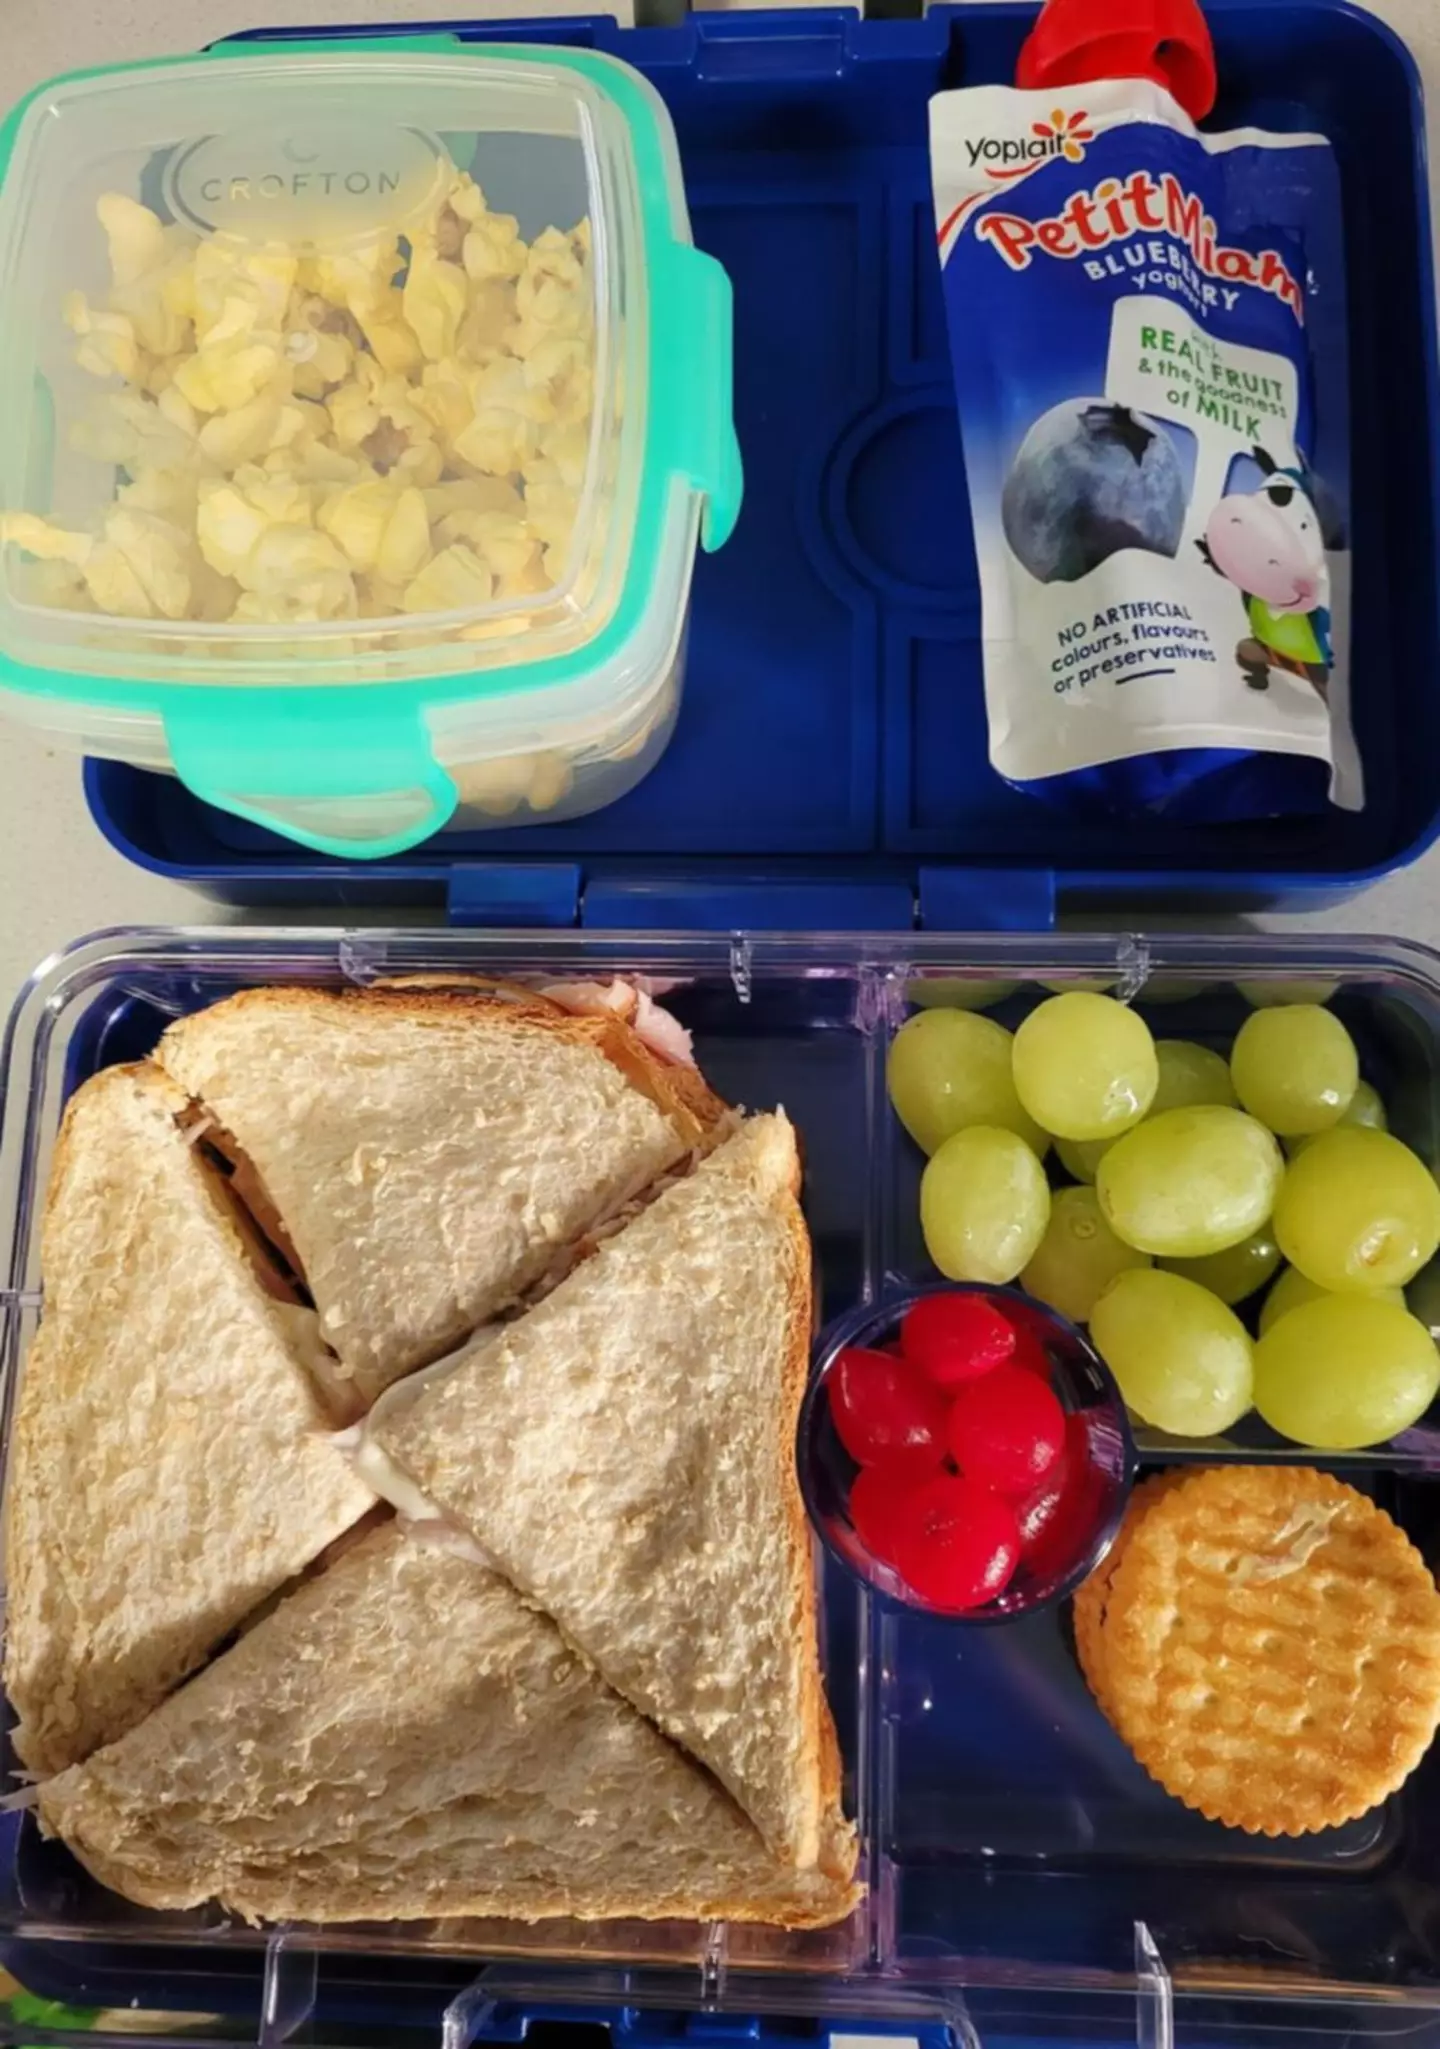 The child's lunch box sparked a debate (